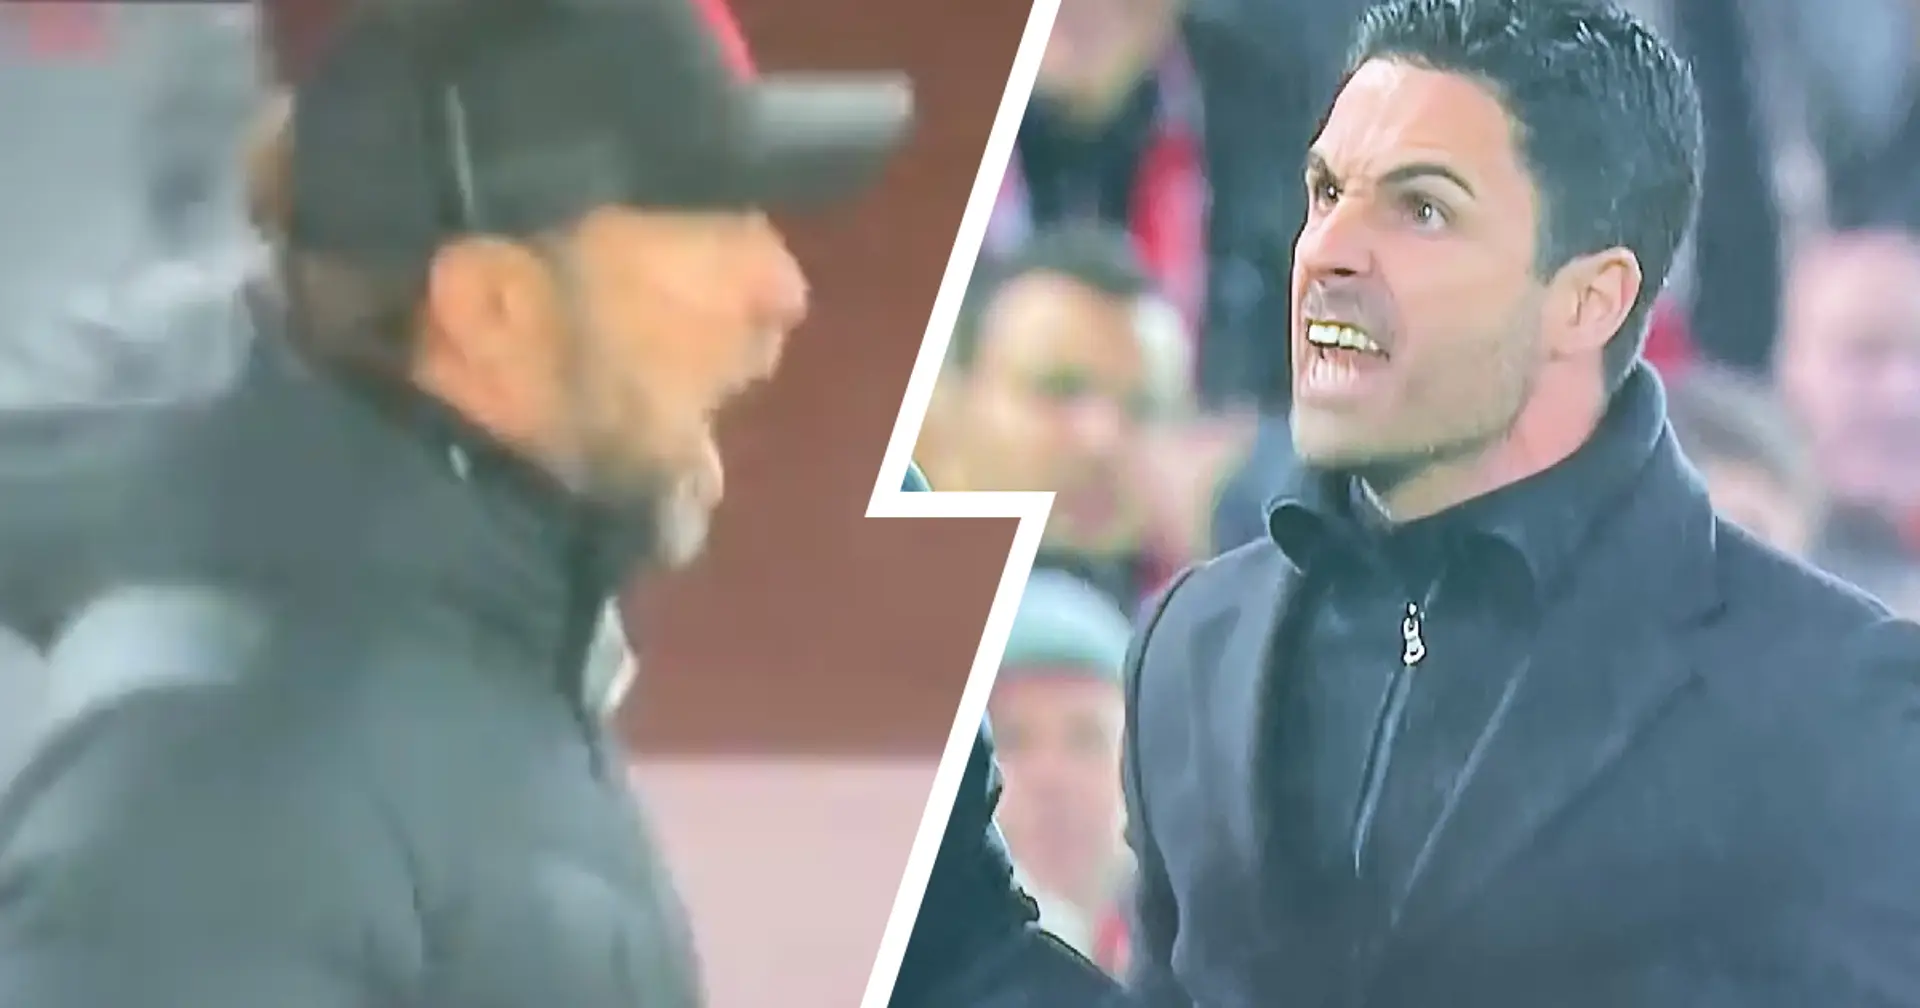 Caught on camera: Arteta and Klopp square off on touchline, almost end up fighting 